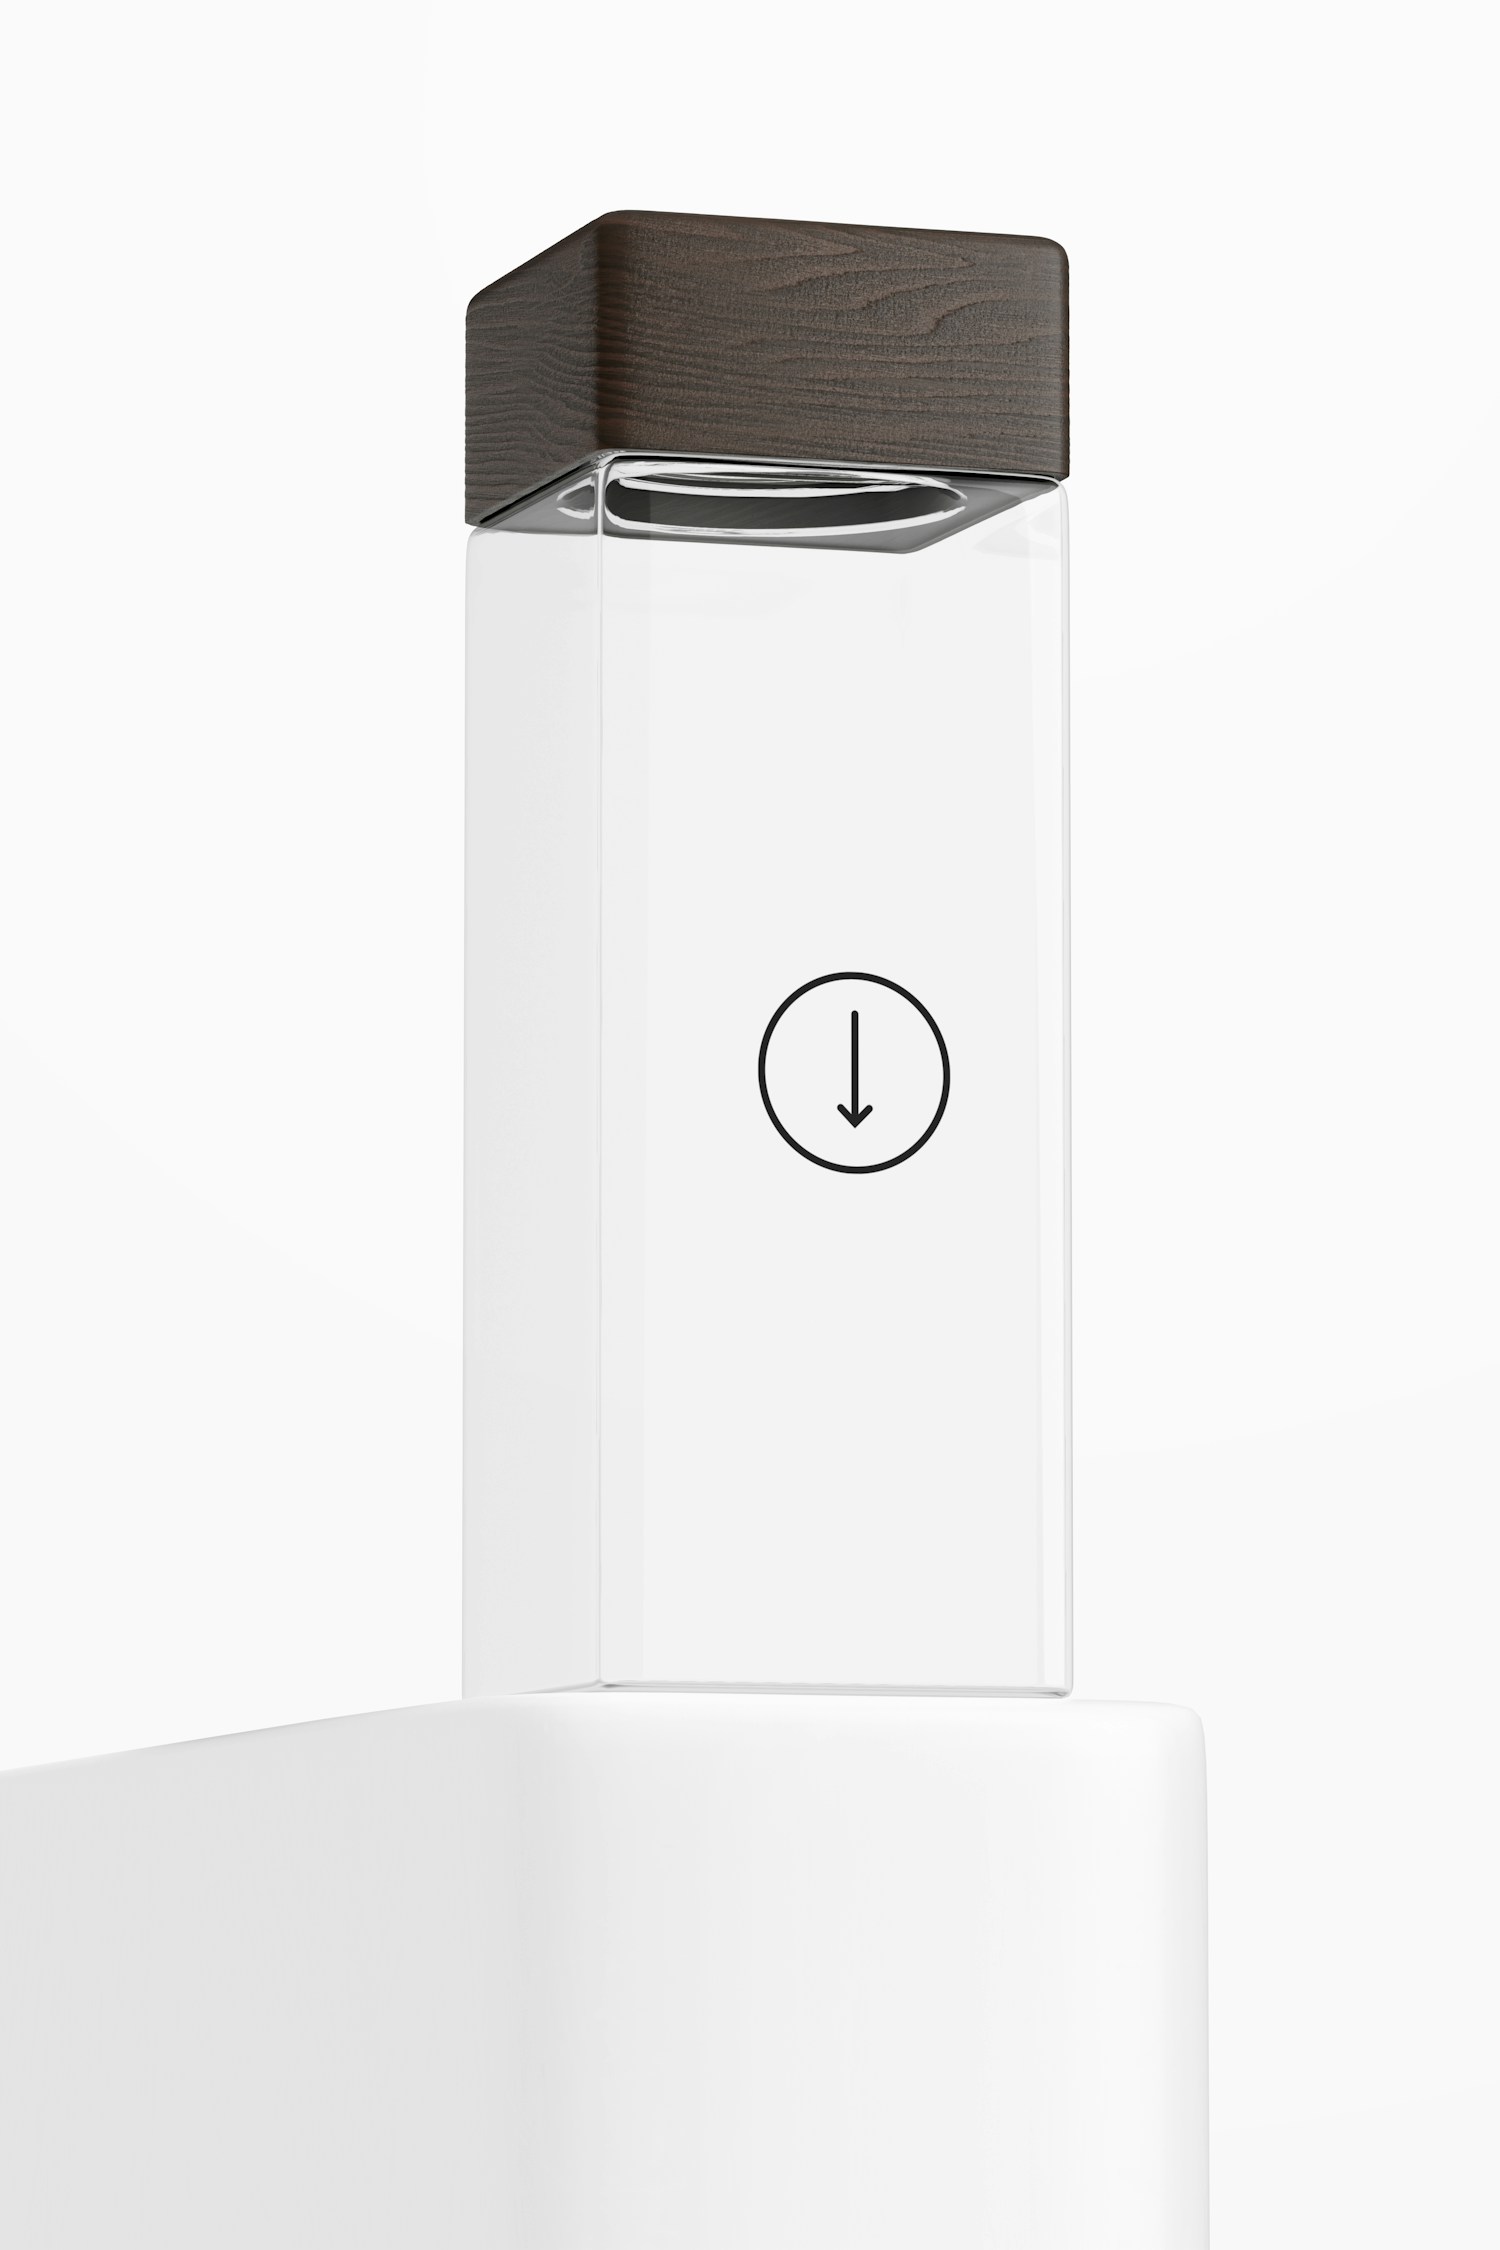 Square Water Bottle Mockup, Low Angle View